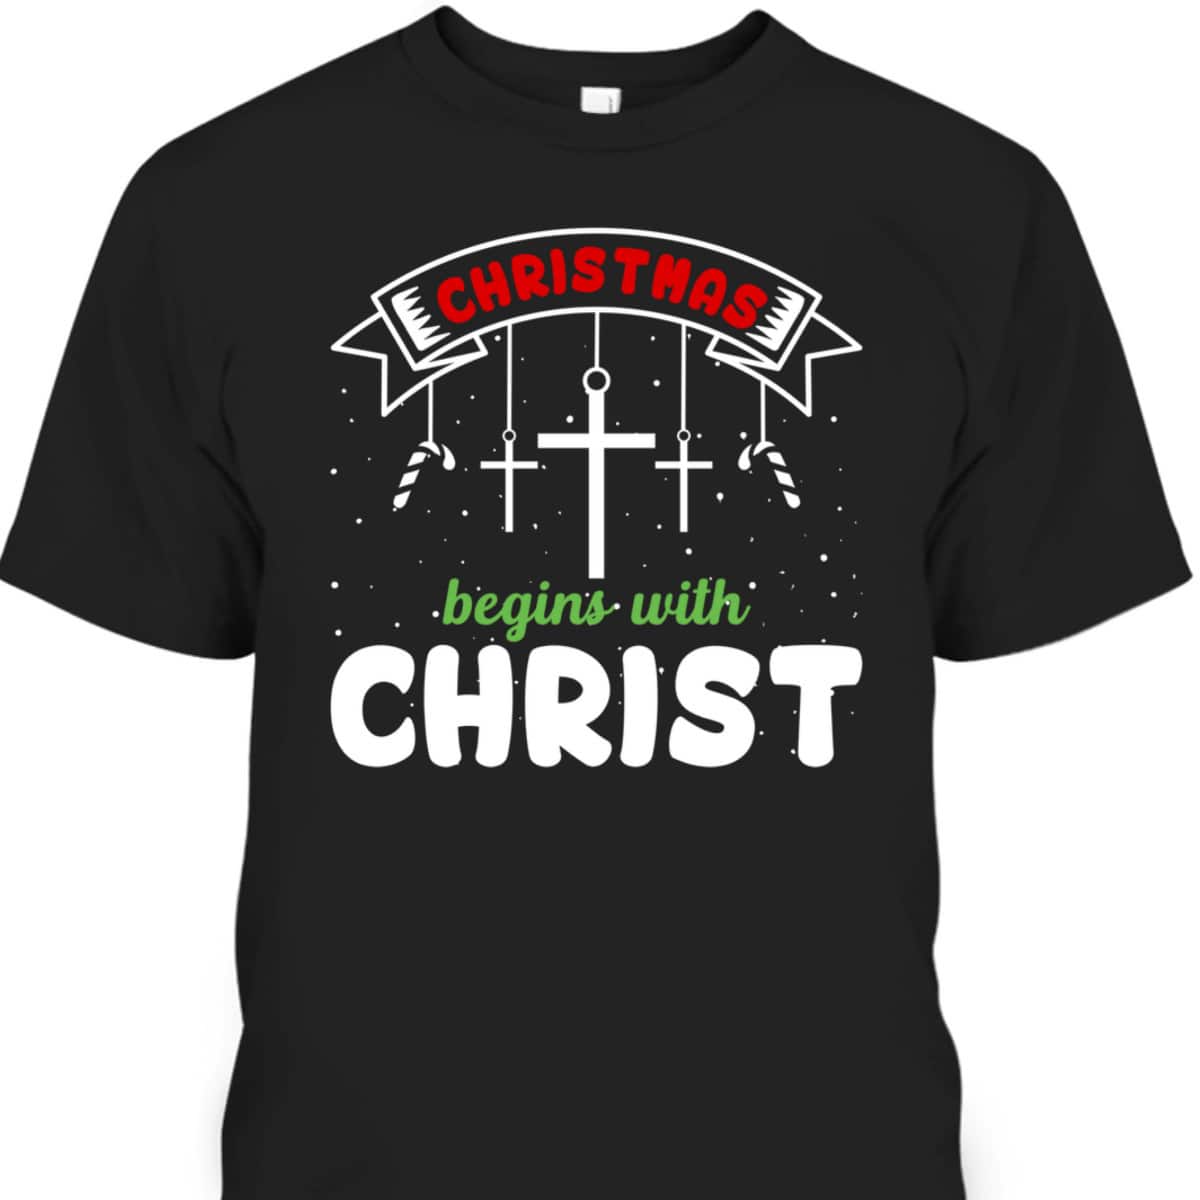 Christmas Begins With Christ Christian Religious T-Shirt